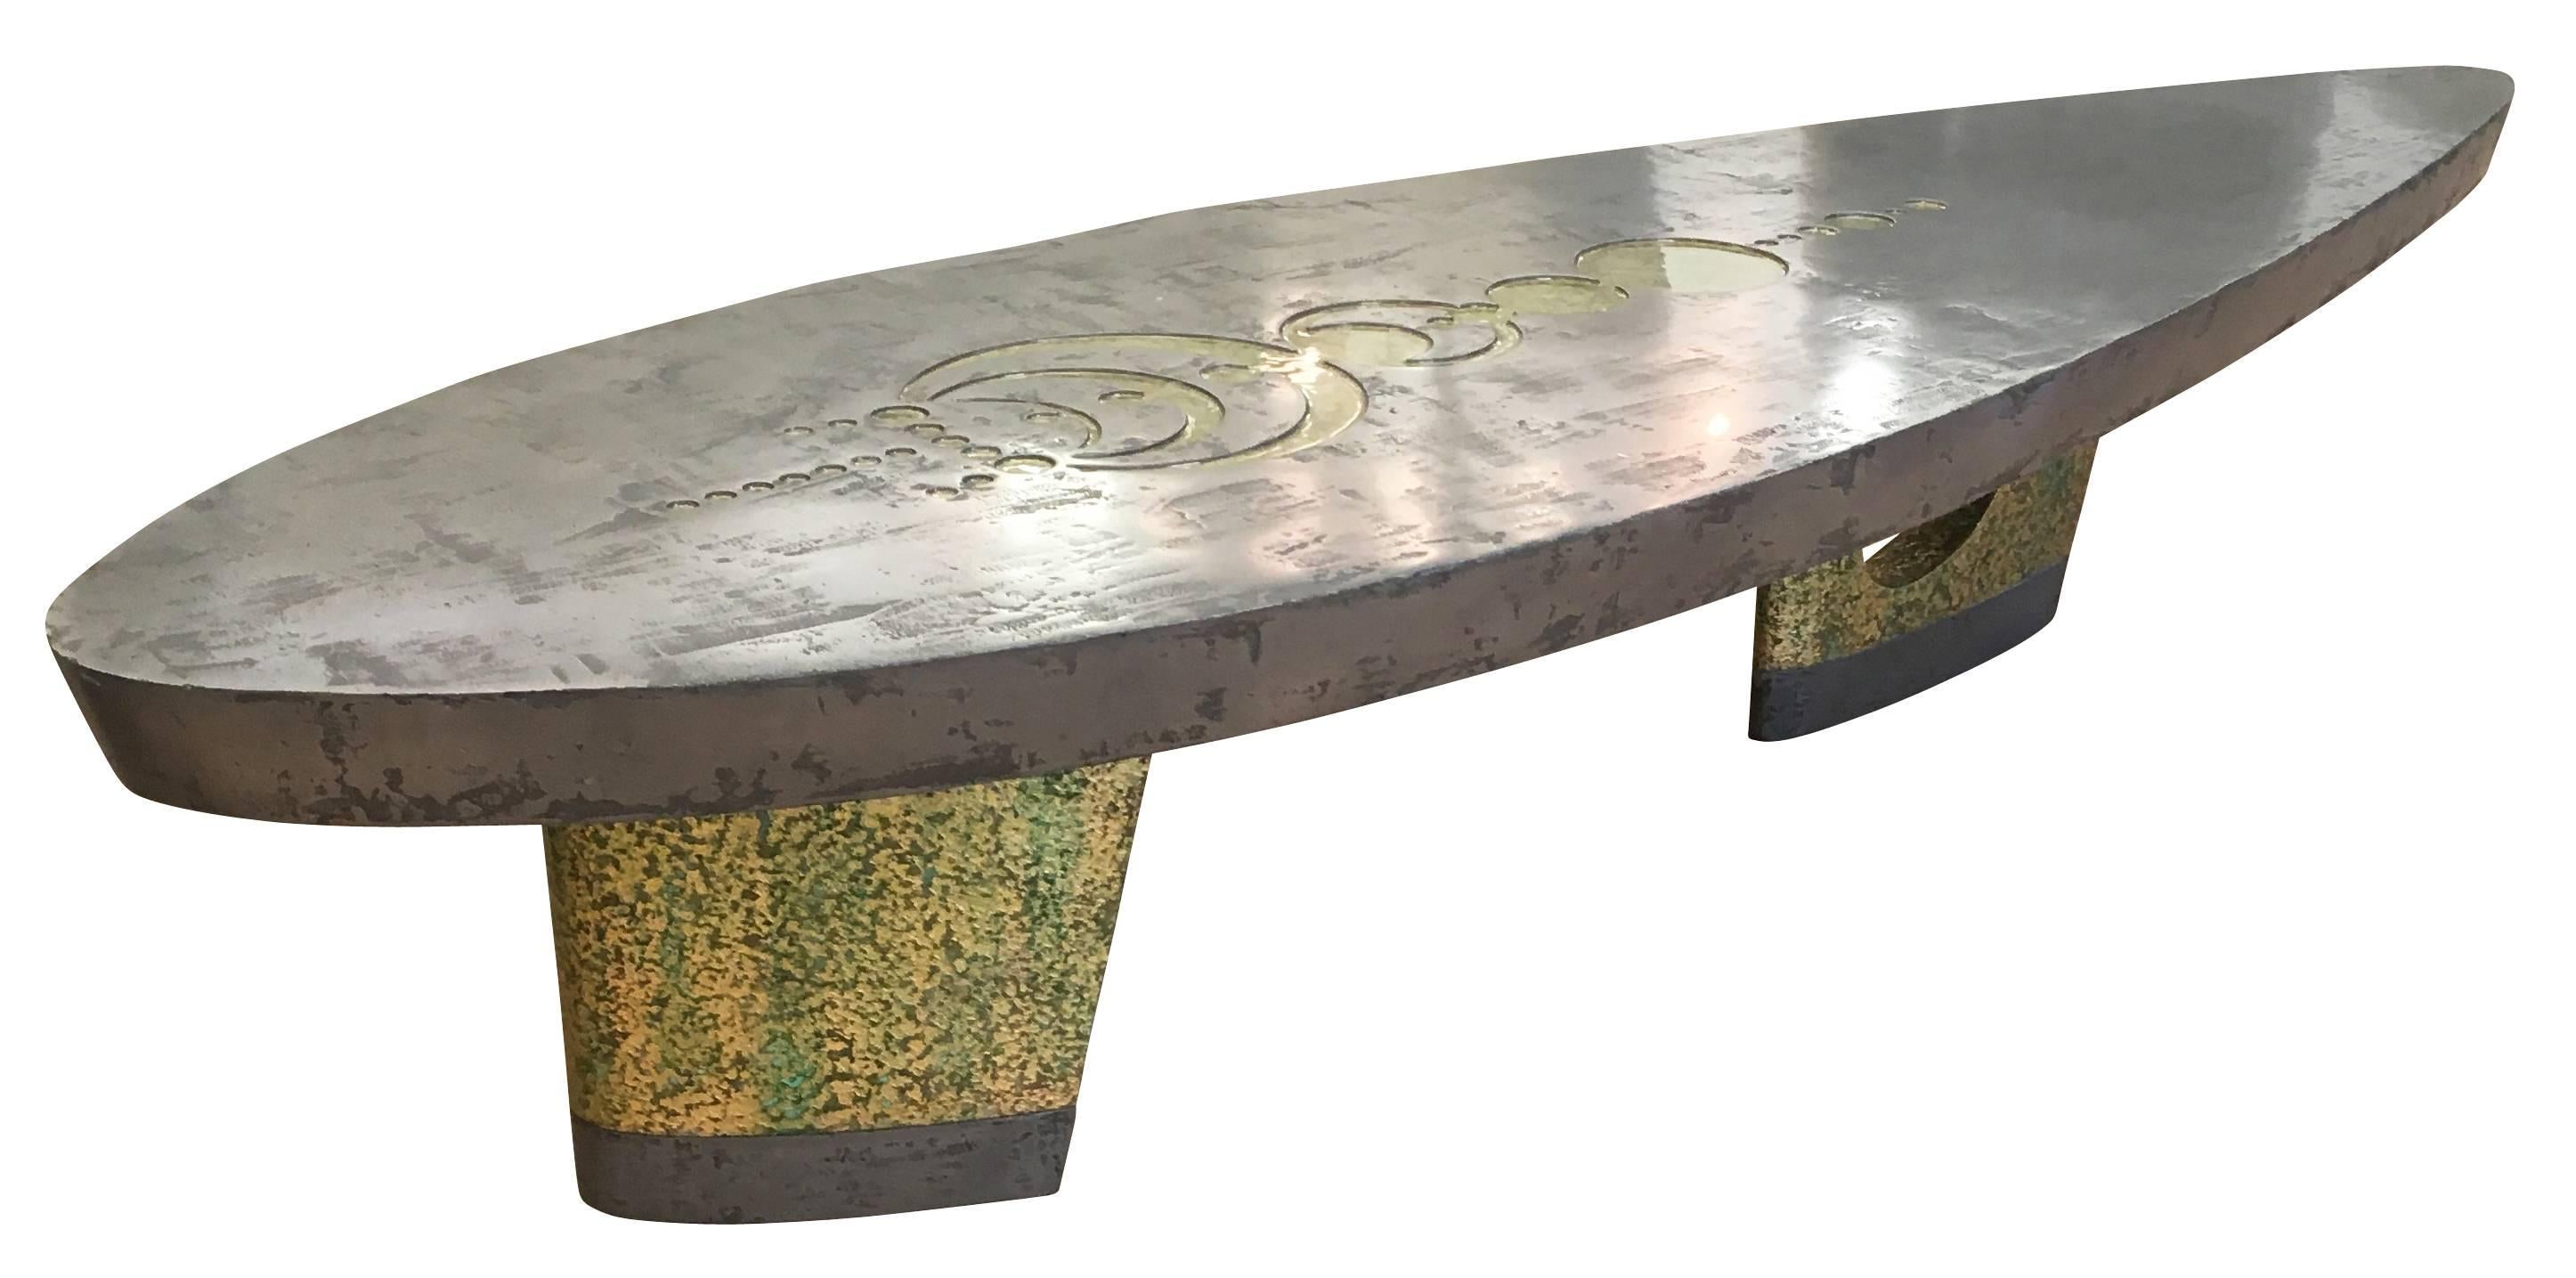 One of a kind contemporary coffee table made of metal and resin. The surf shaped top has a distressed feel that blends harmoniously with the organic base. The top also has engravings reminiscent of astrological symbols.

Measures: Width 79”

Depth